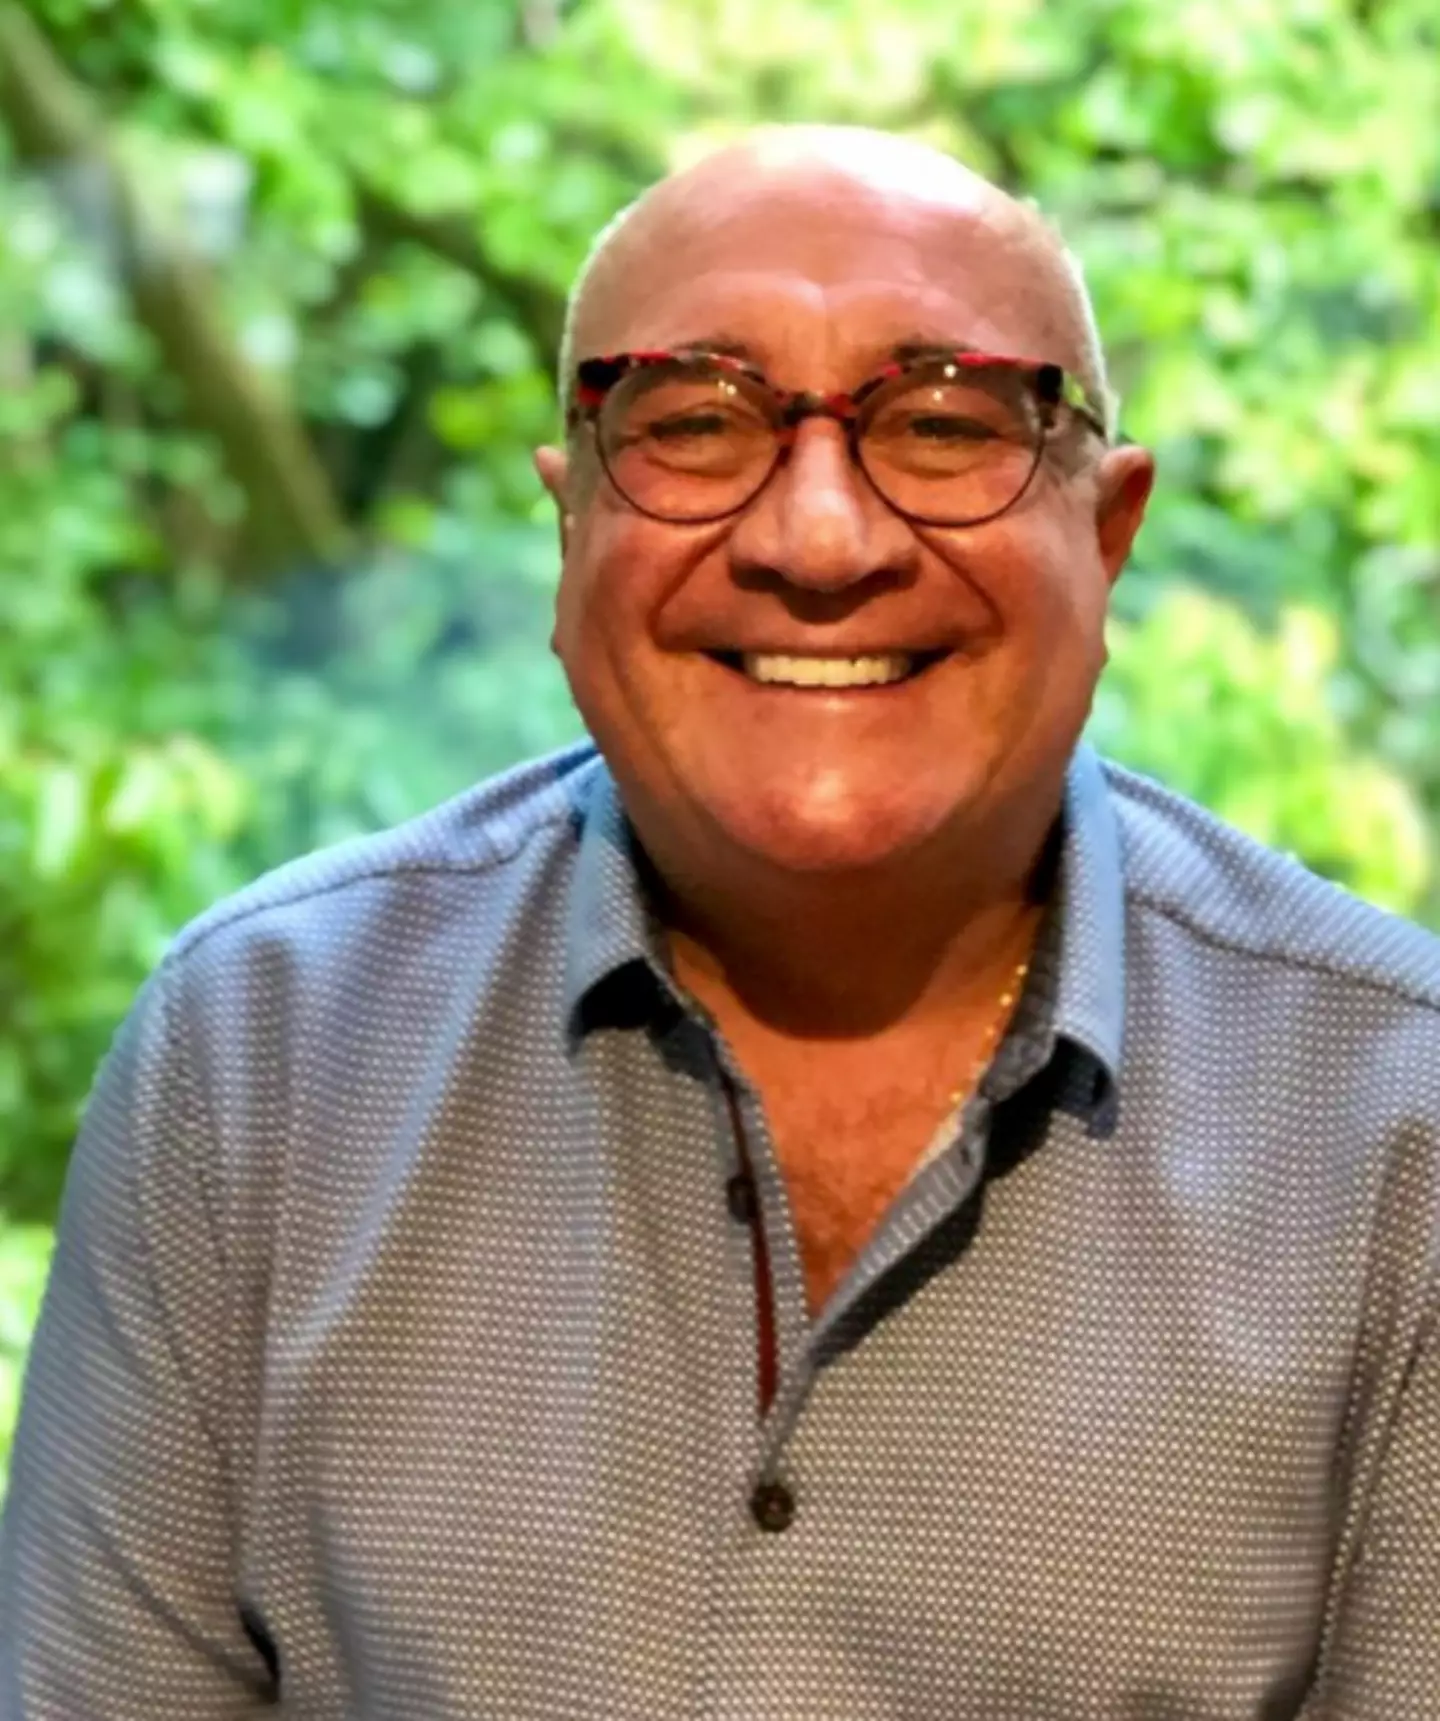 Brendan Sheerin is the famous and much-loved tour guide of Coach Trip. (